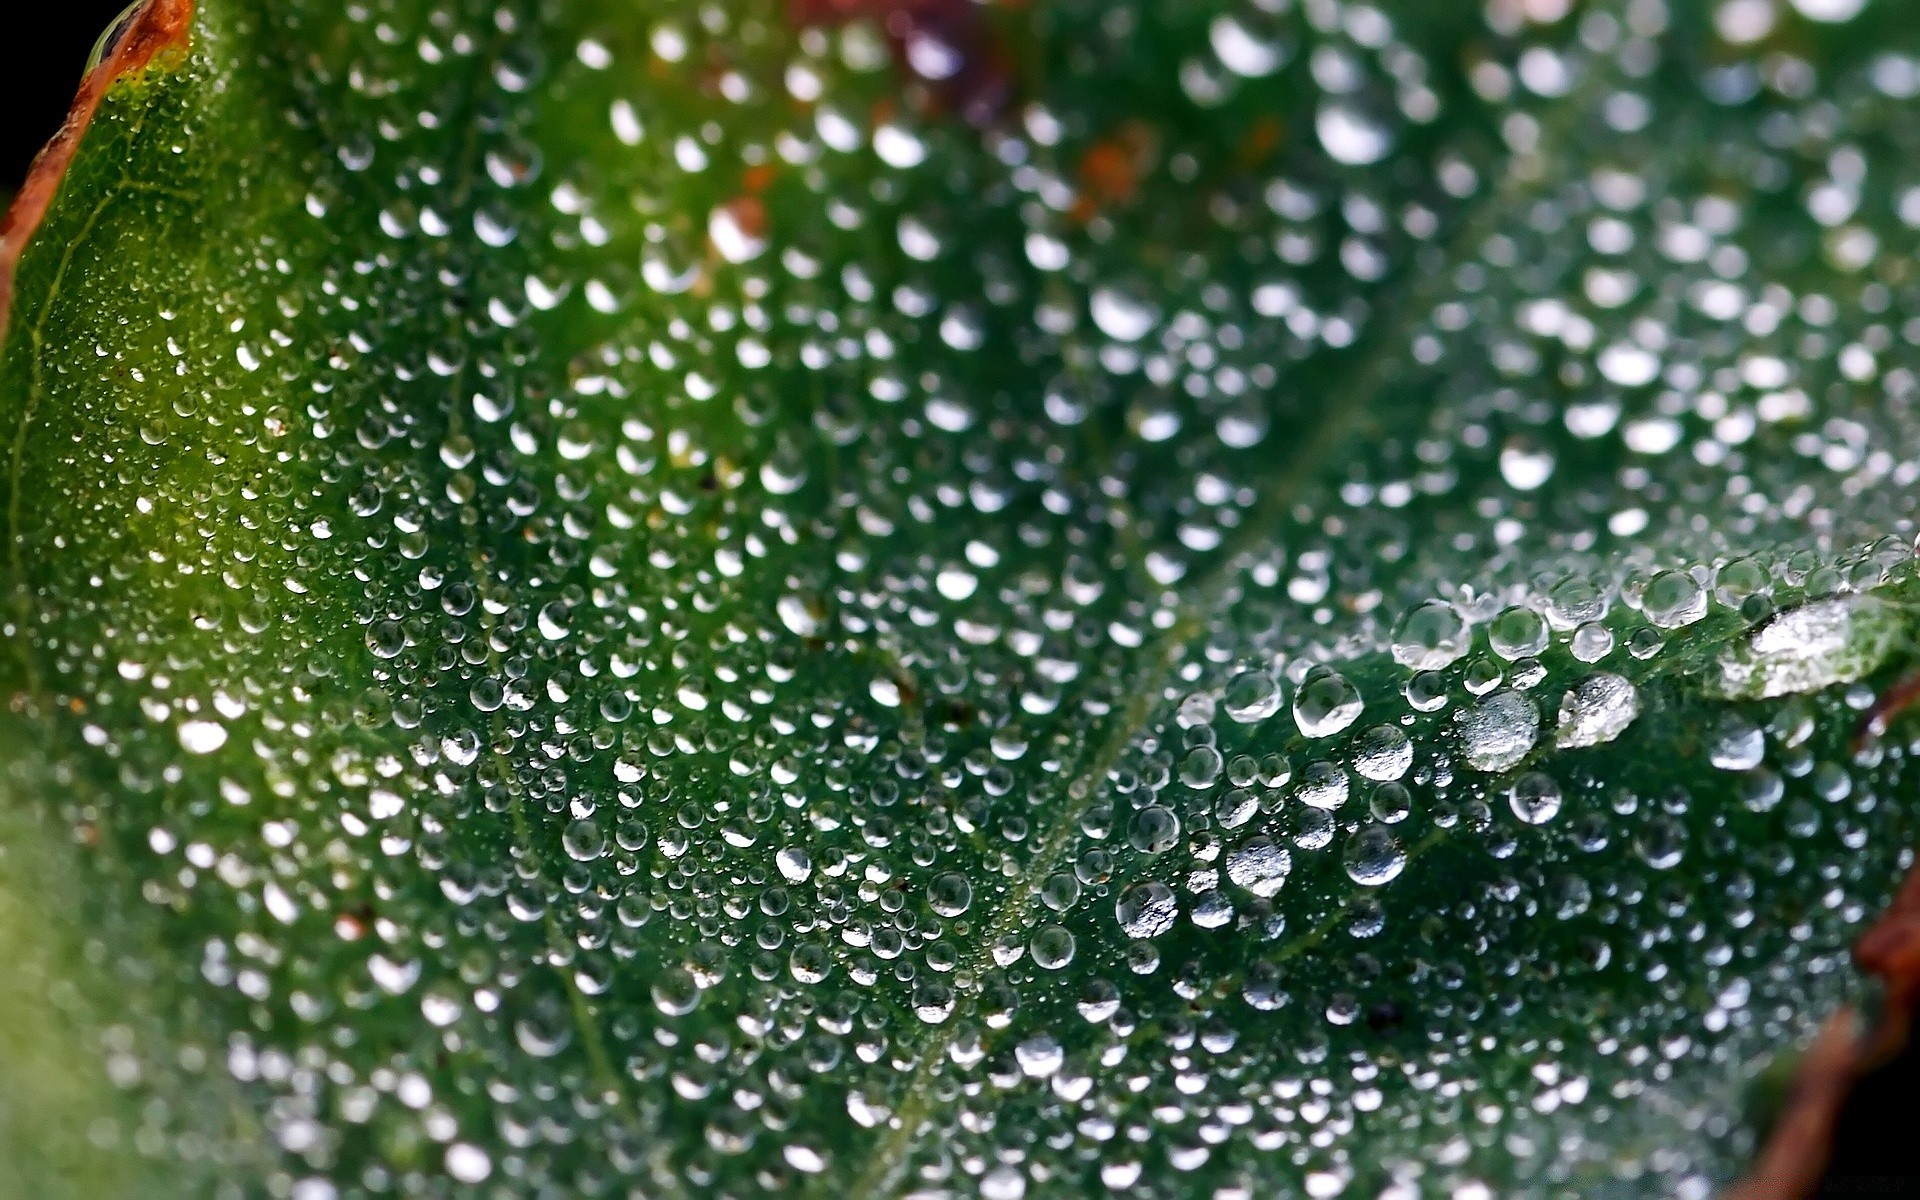 droplets and water dew drop rain wet water droplet raindrop waterdrop liquid dewy purity bubble clean shining freshness flora leaf nature